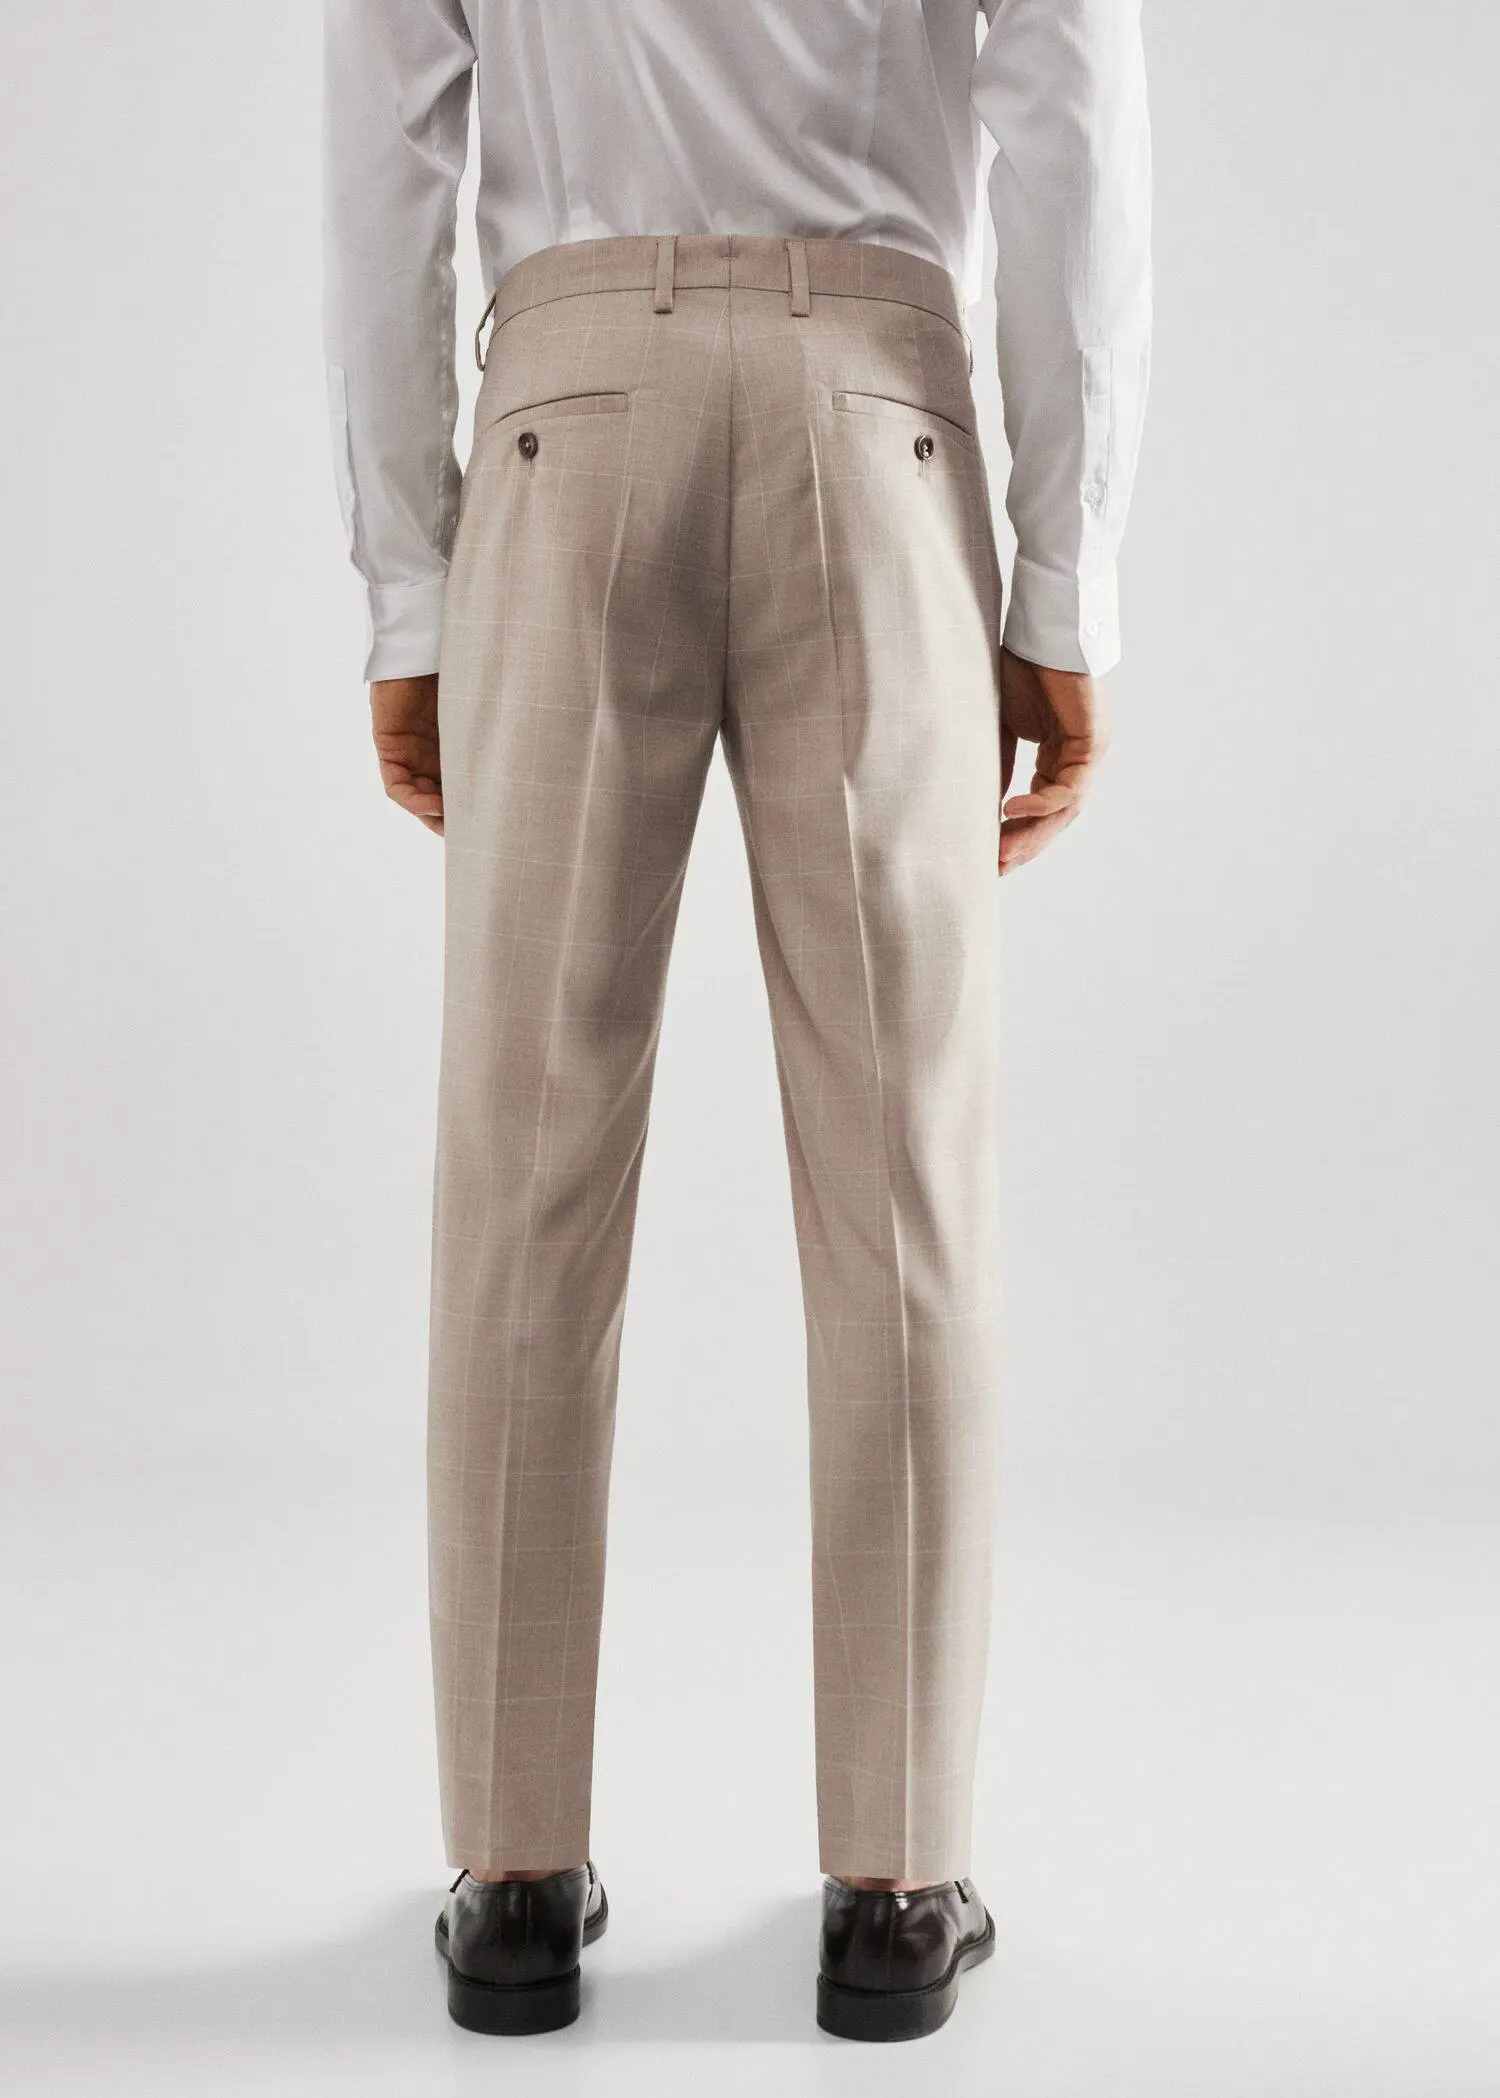 Mango Super slim-fit Tailored check pants. a man wearing a suit and tie standing in front of a white wall. 